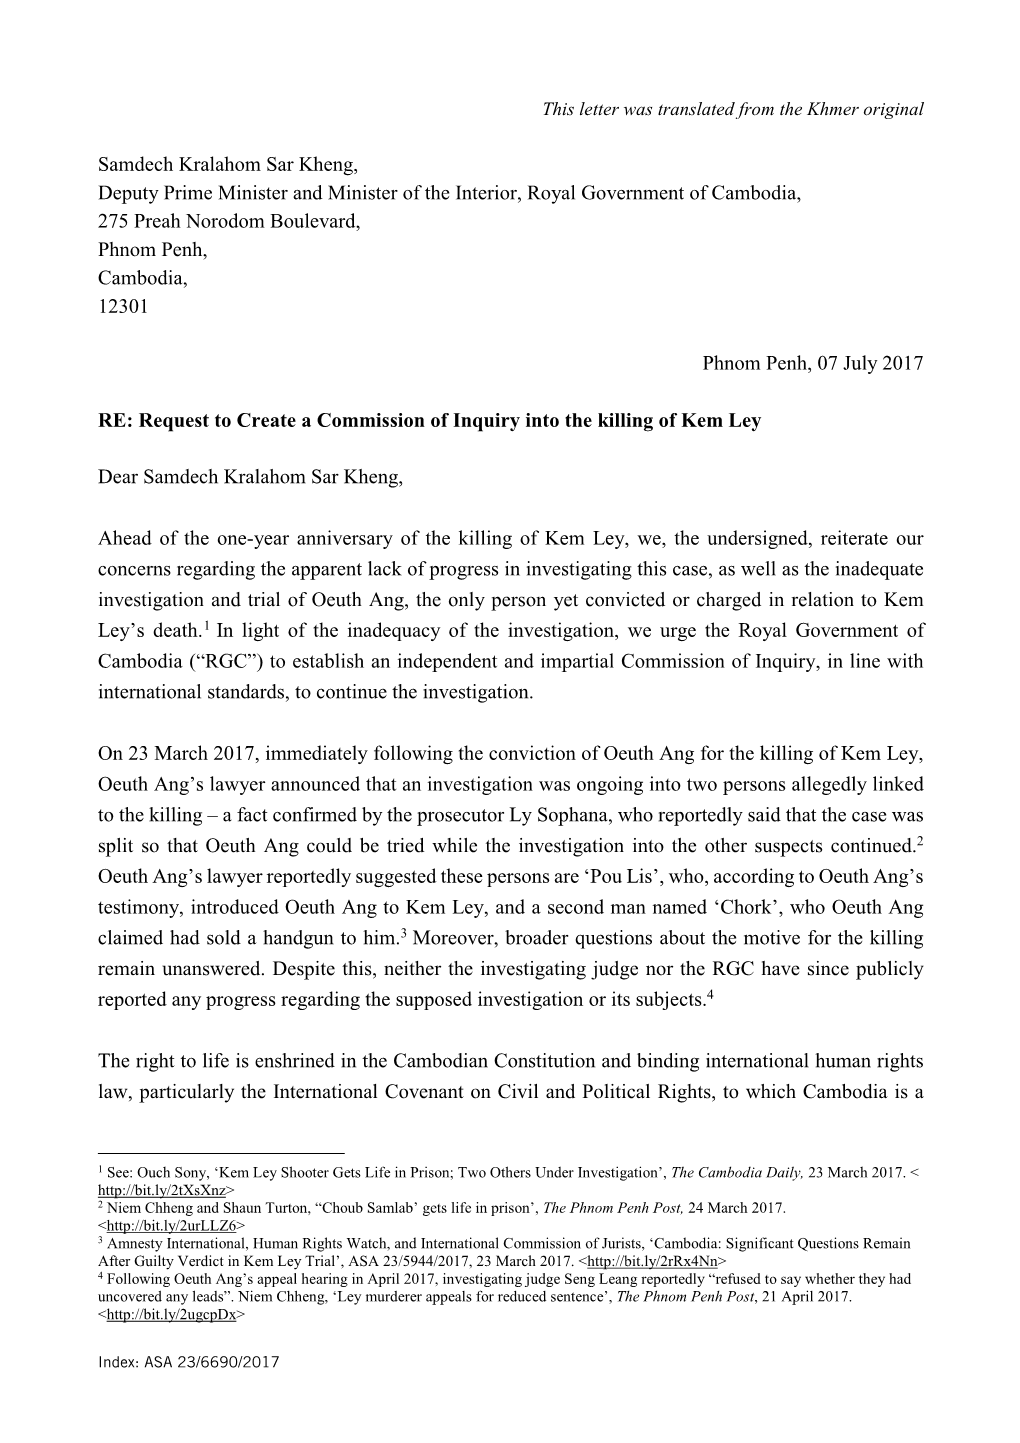 Cambodia: Call for Commission of Inquiry Into the Killing of Kem